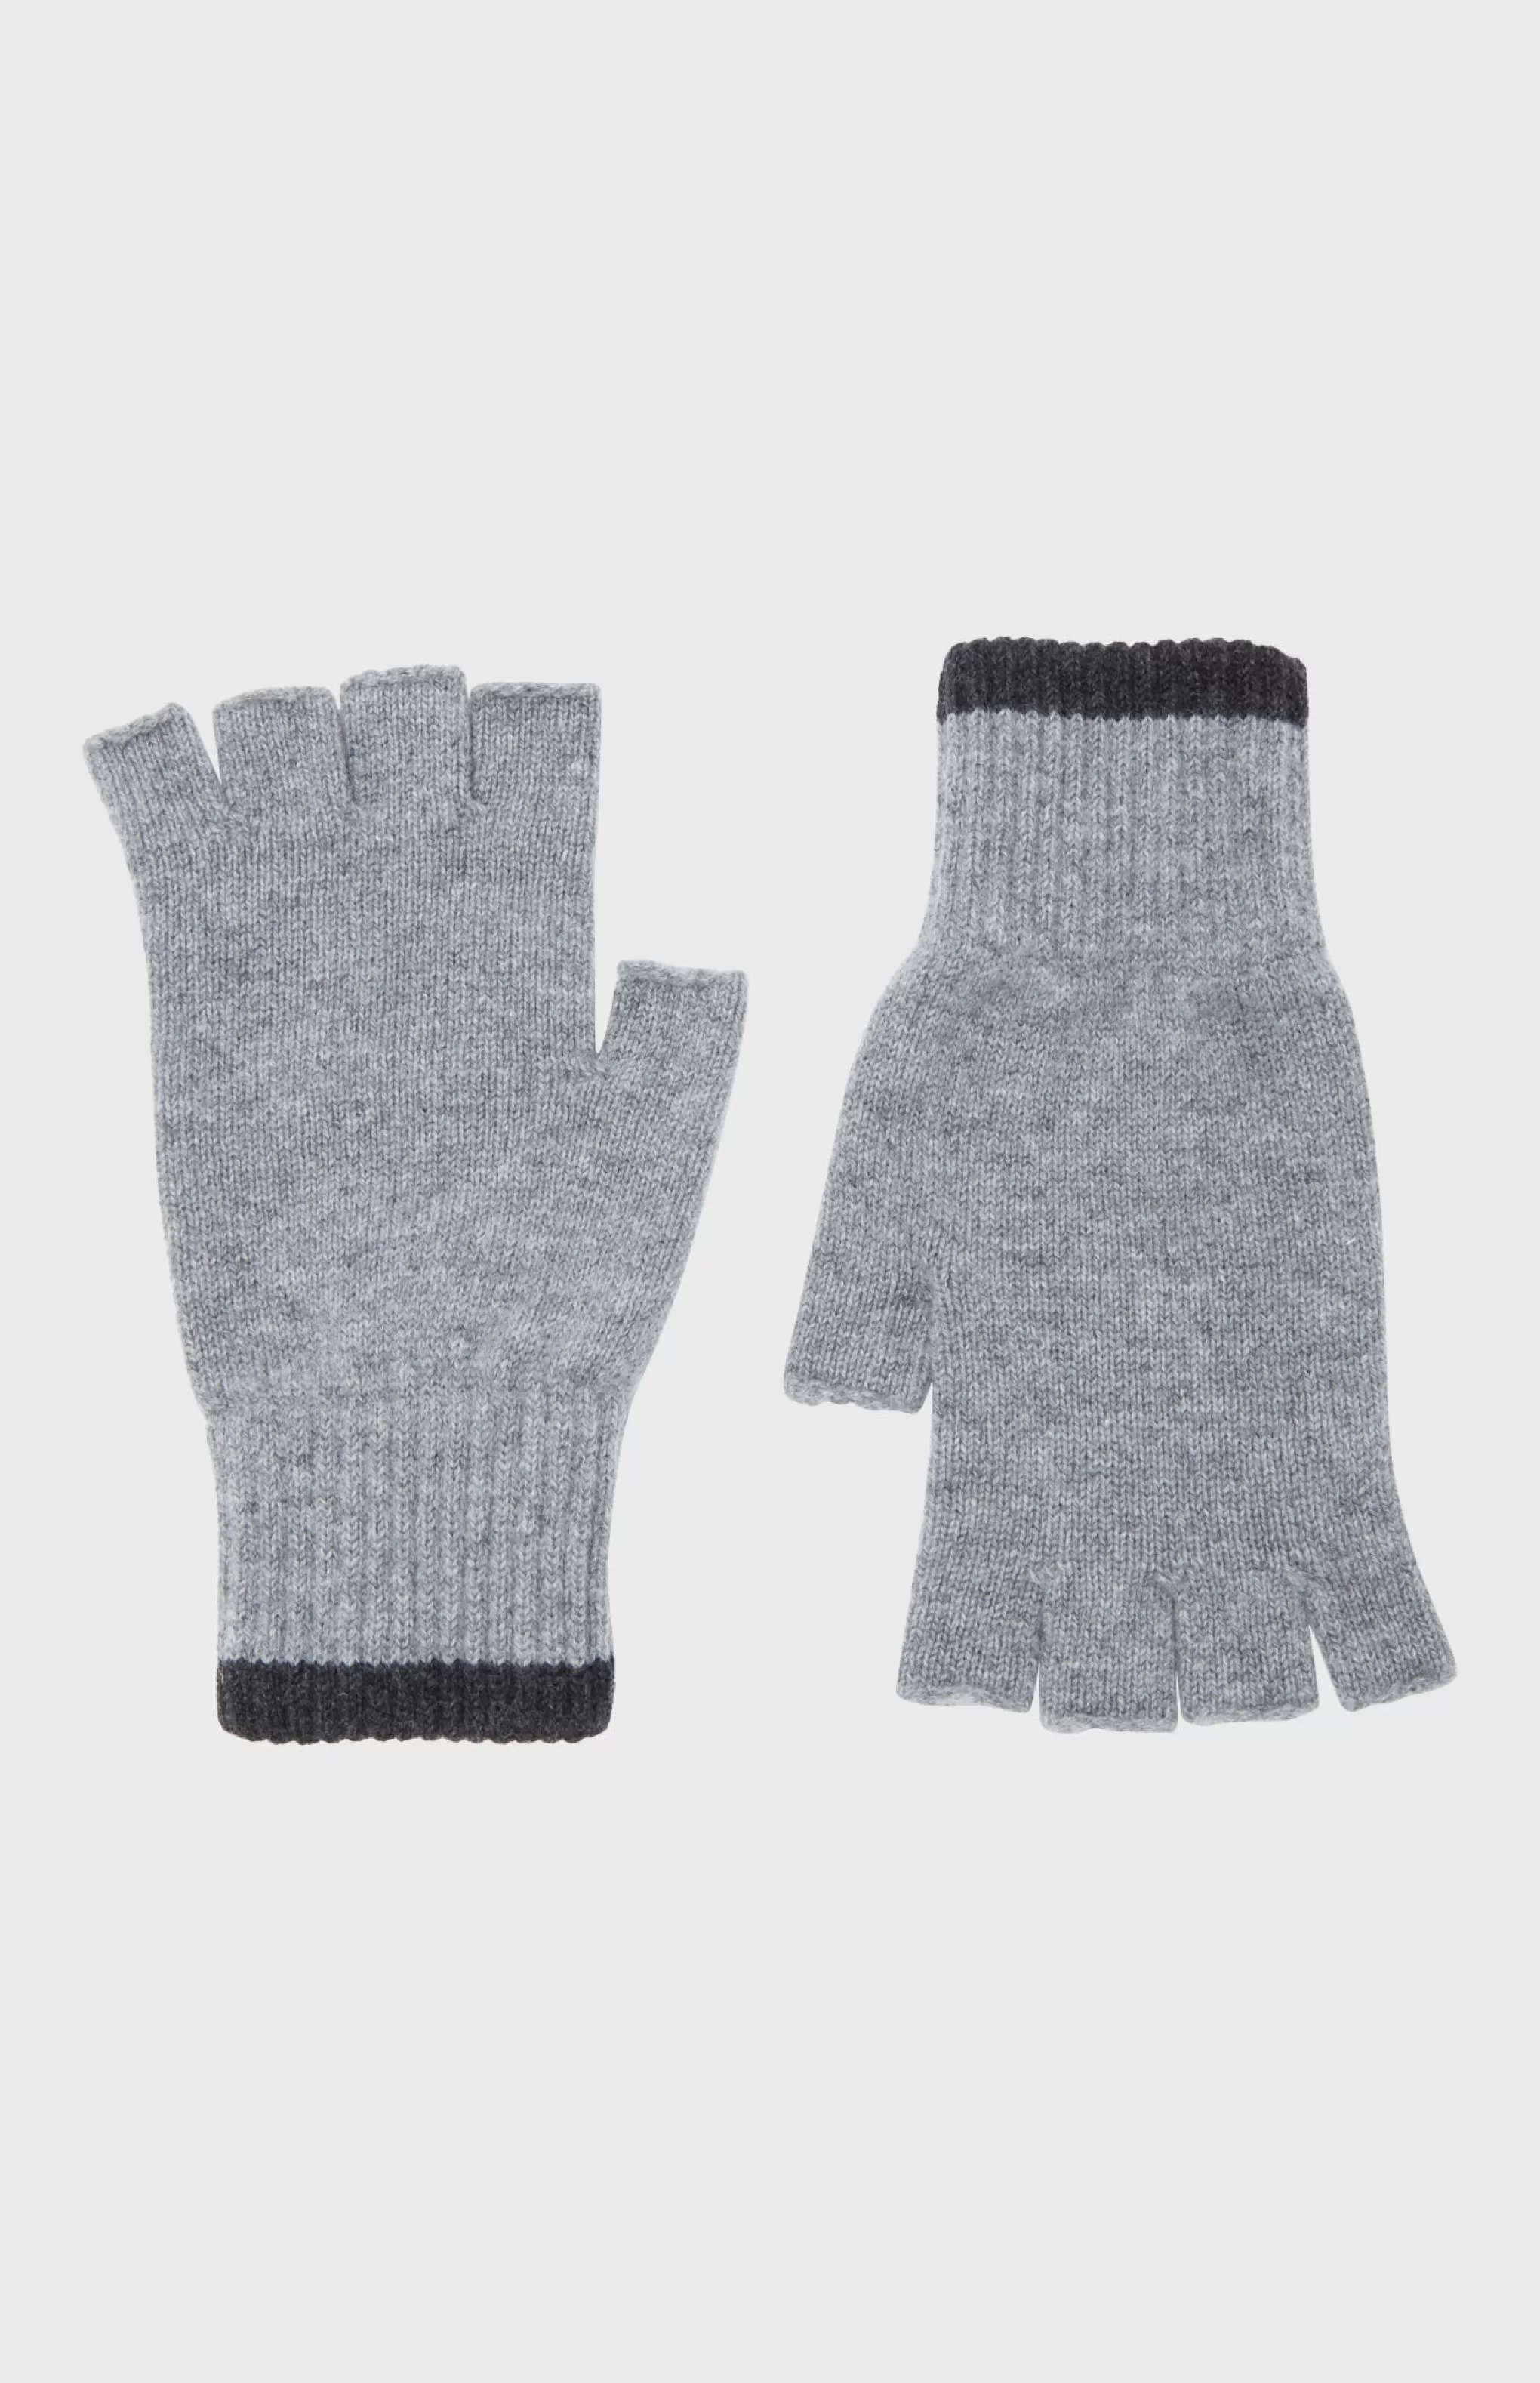 Best Sale Cashmere Fingerless Gloves Contrast Ribs In Flannel Grey And Charcoal Men Gifts for Men